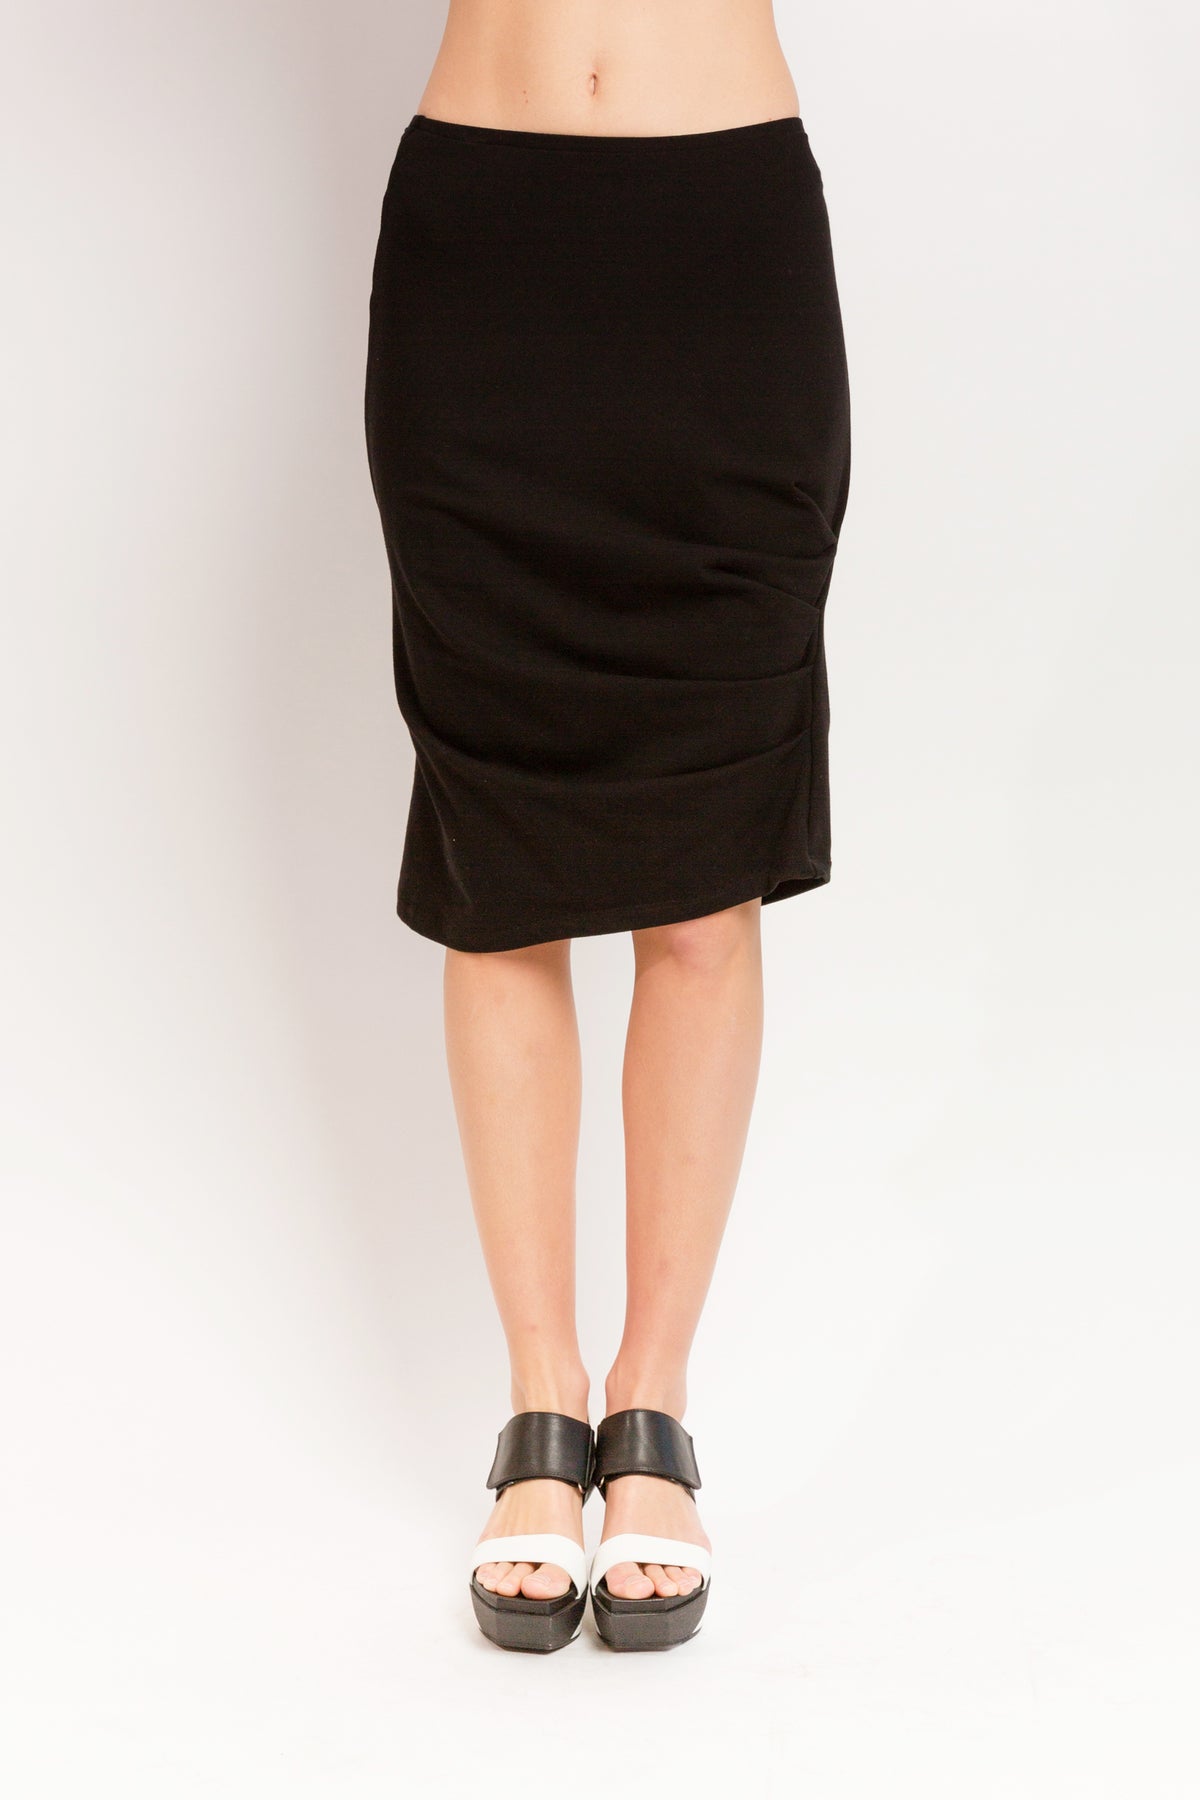 Caterpillar Knee Skirt in Black Soy French Terry